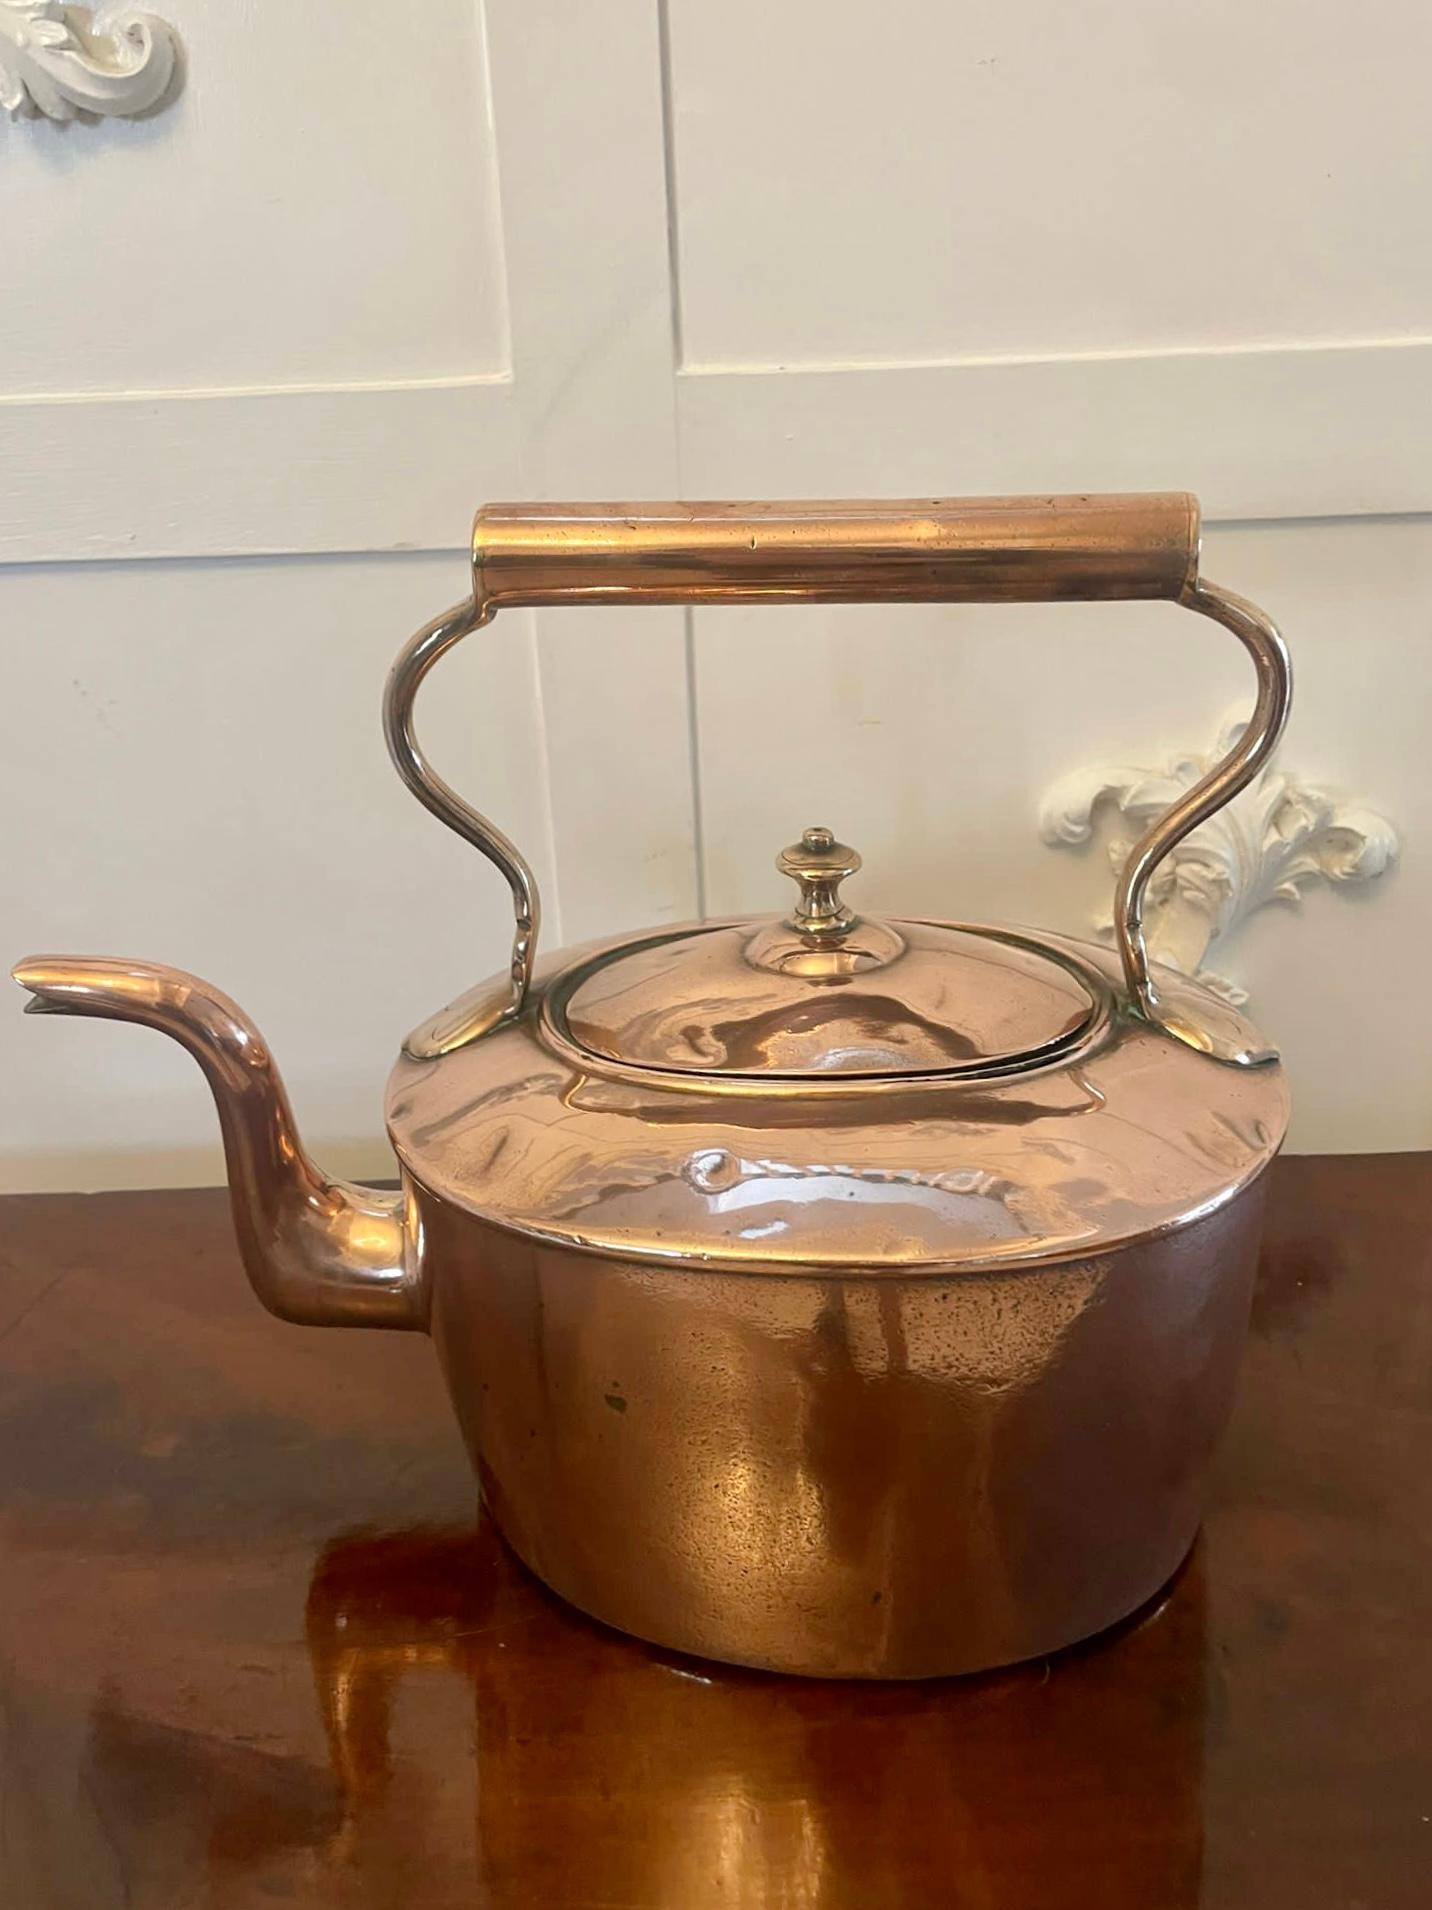 Large antique George III quality oval shaped copper kettle with a shaped handle, spout and lift off lid


We stock a large selection of copper kettles of all sizes, please ask for further information


Dimensions:
30 cm x 34 cm x 21 cm


Dated 1800 
